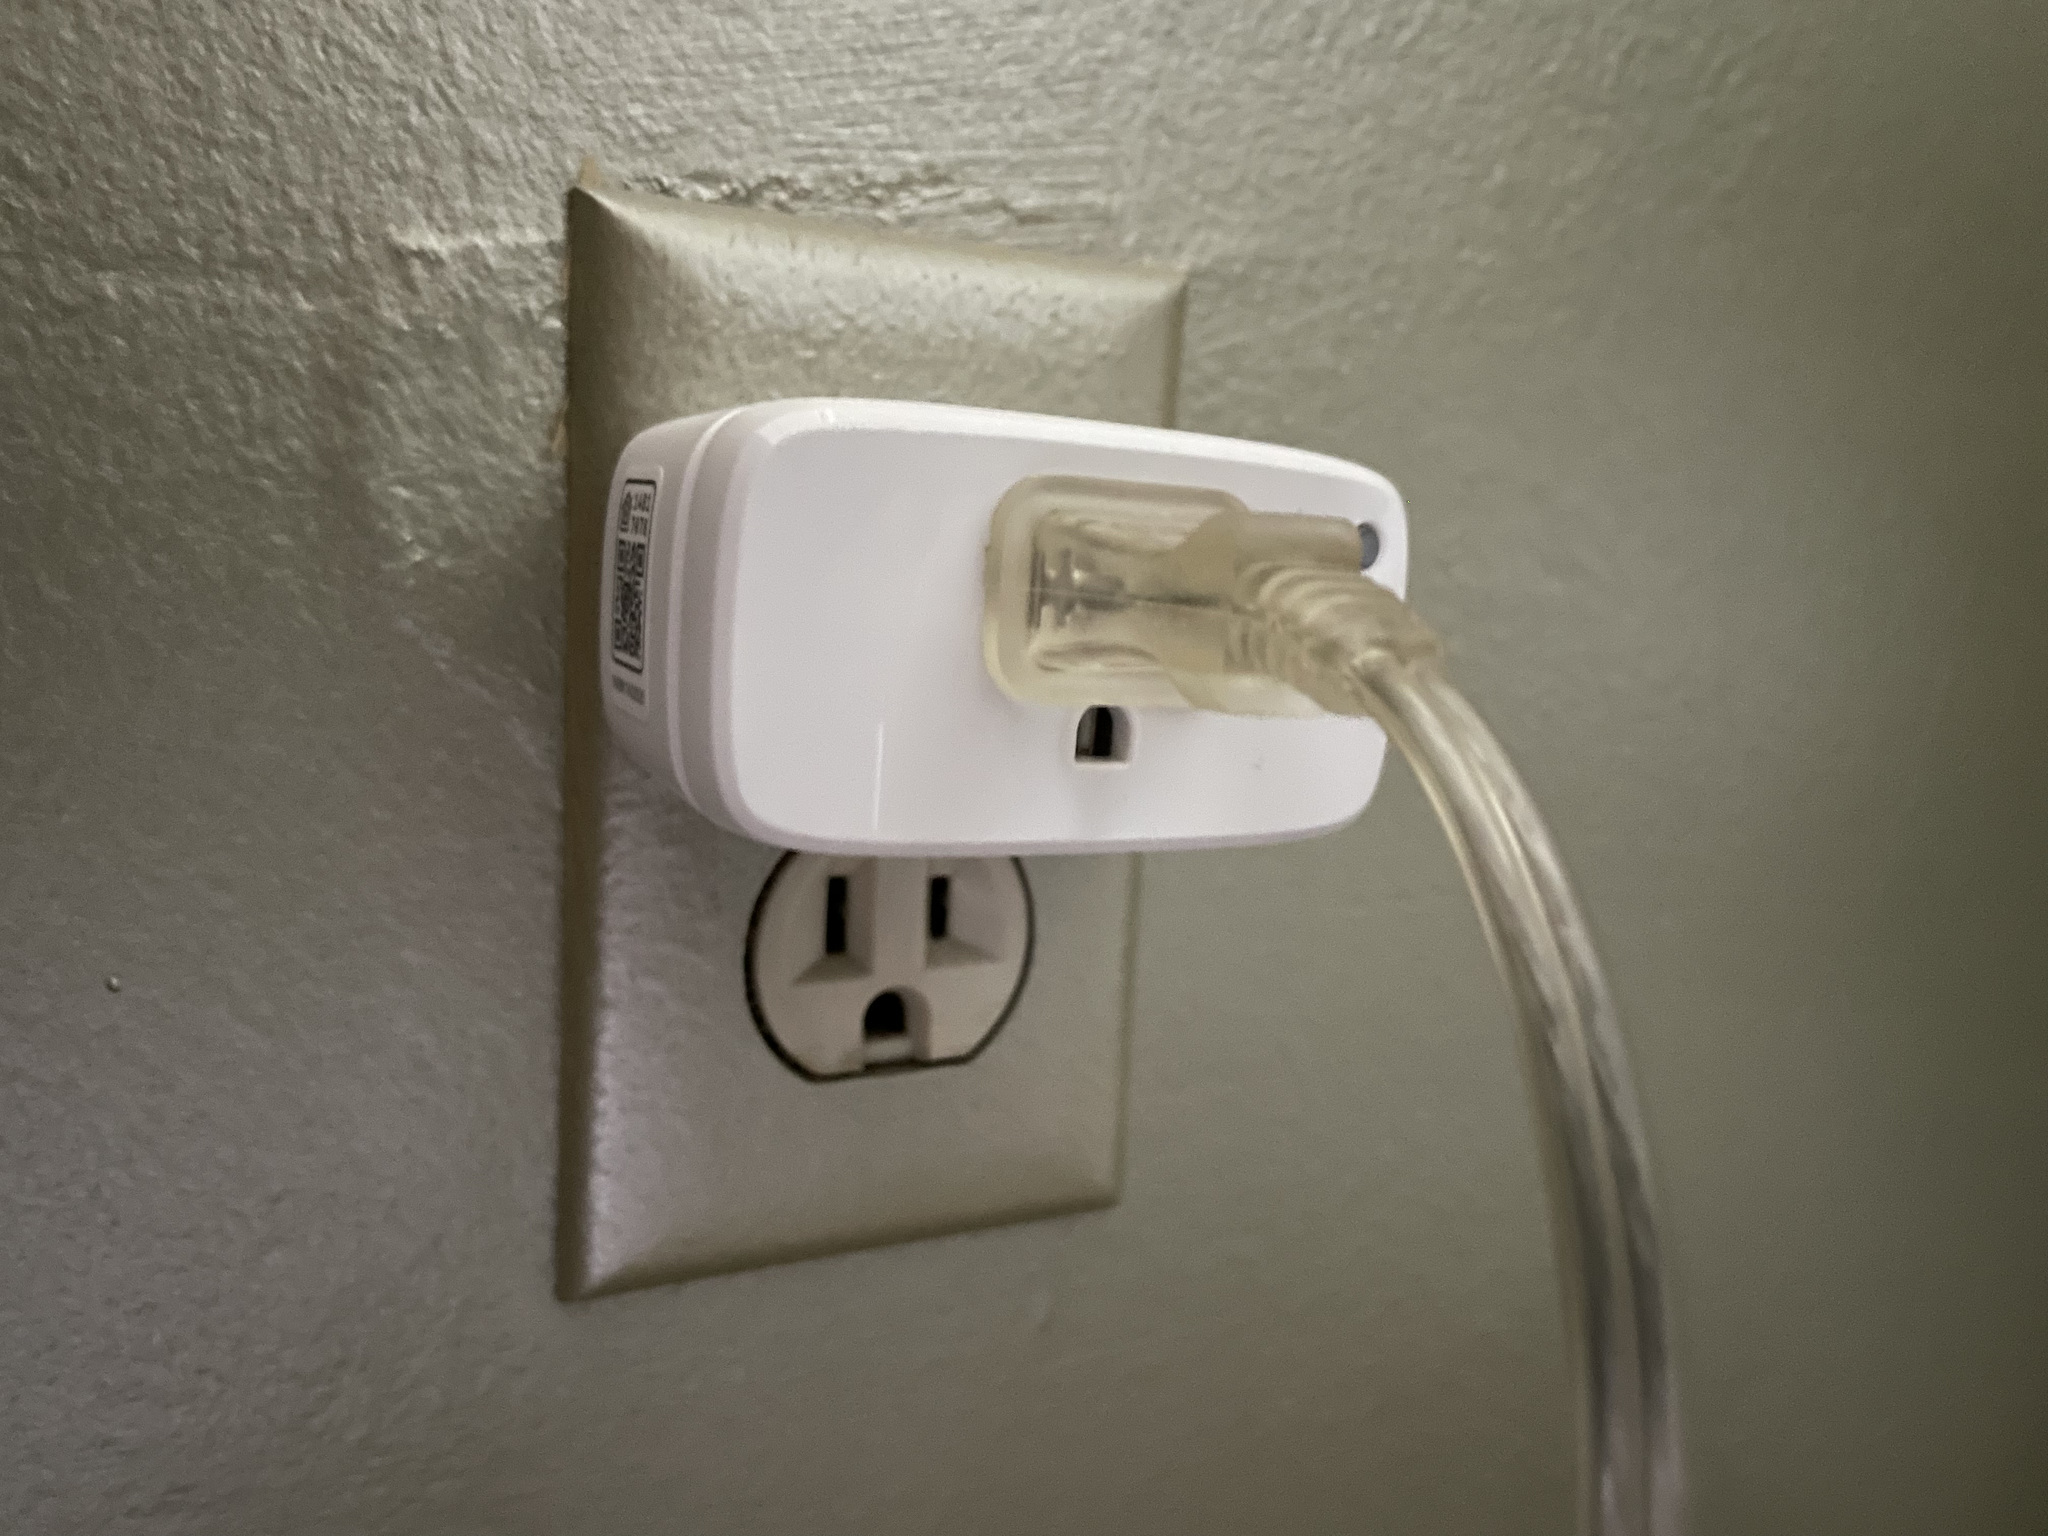 Eve Energy Smart Plug And Power Meter Lifestyle Plugged In See Second Outlet